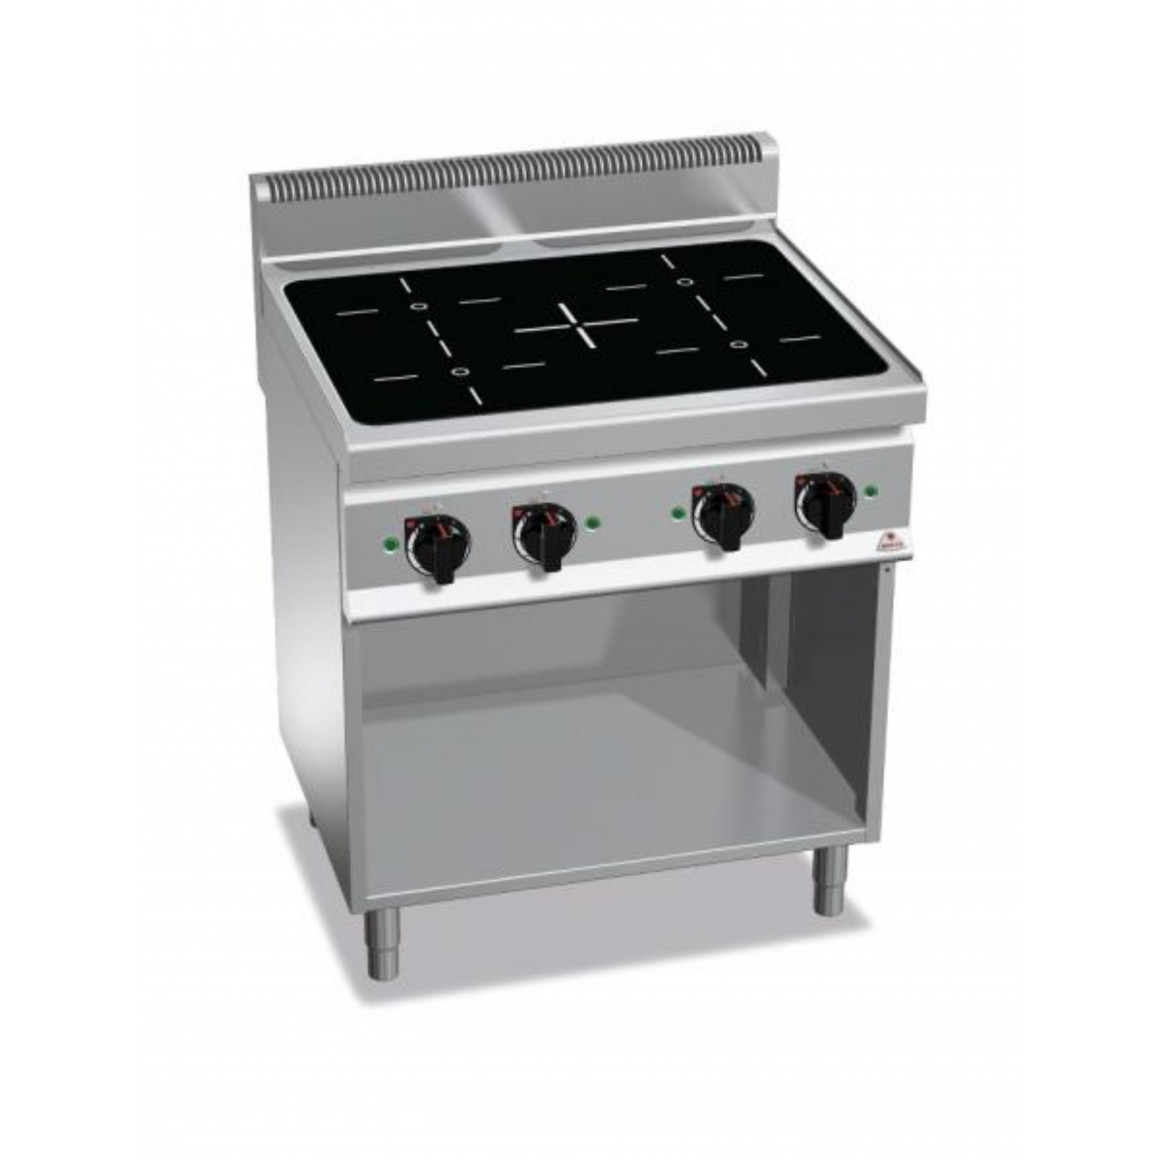 İnduction cooker POWER INDUCTION 4 zones E7P4M/IND